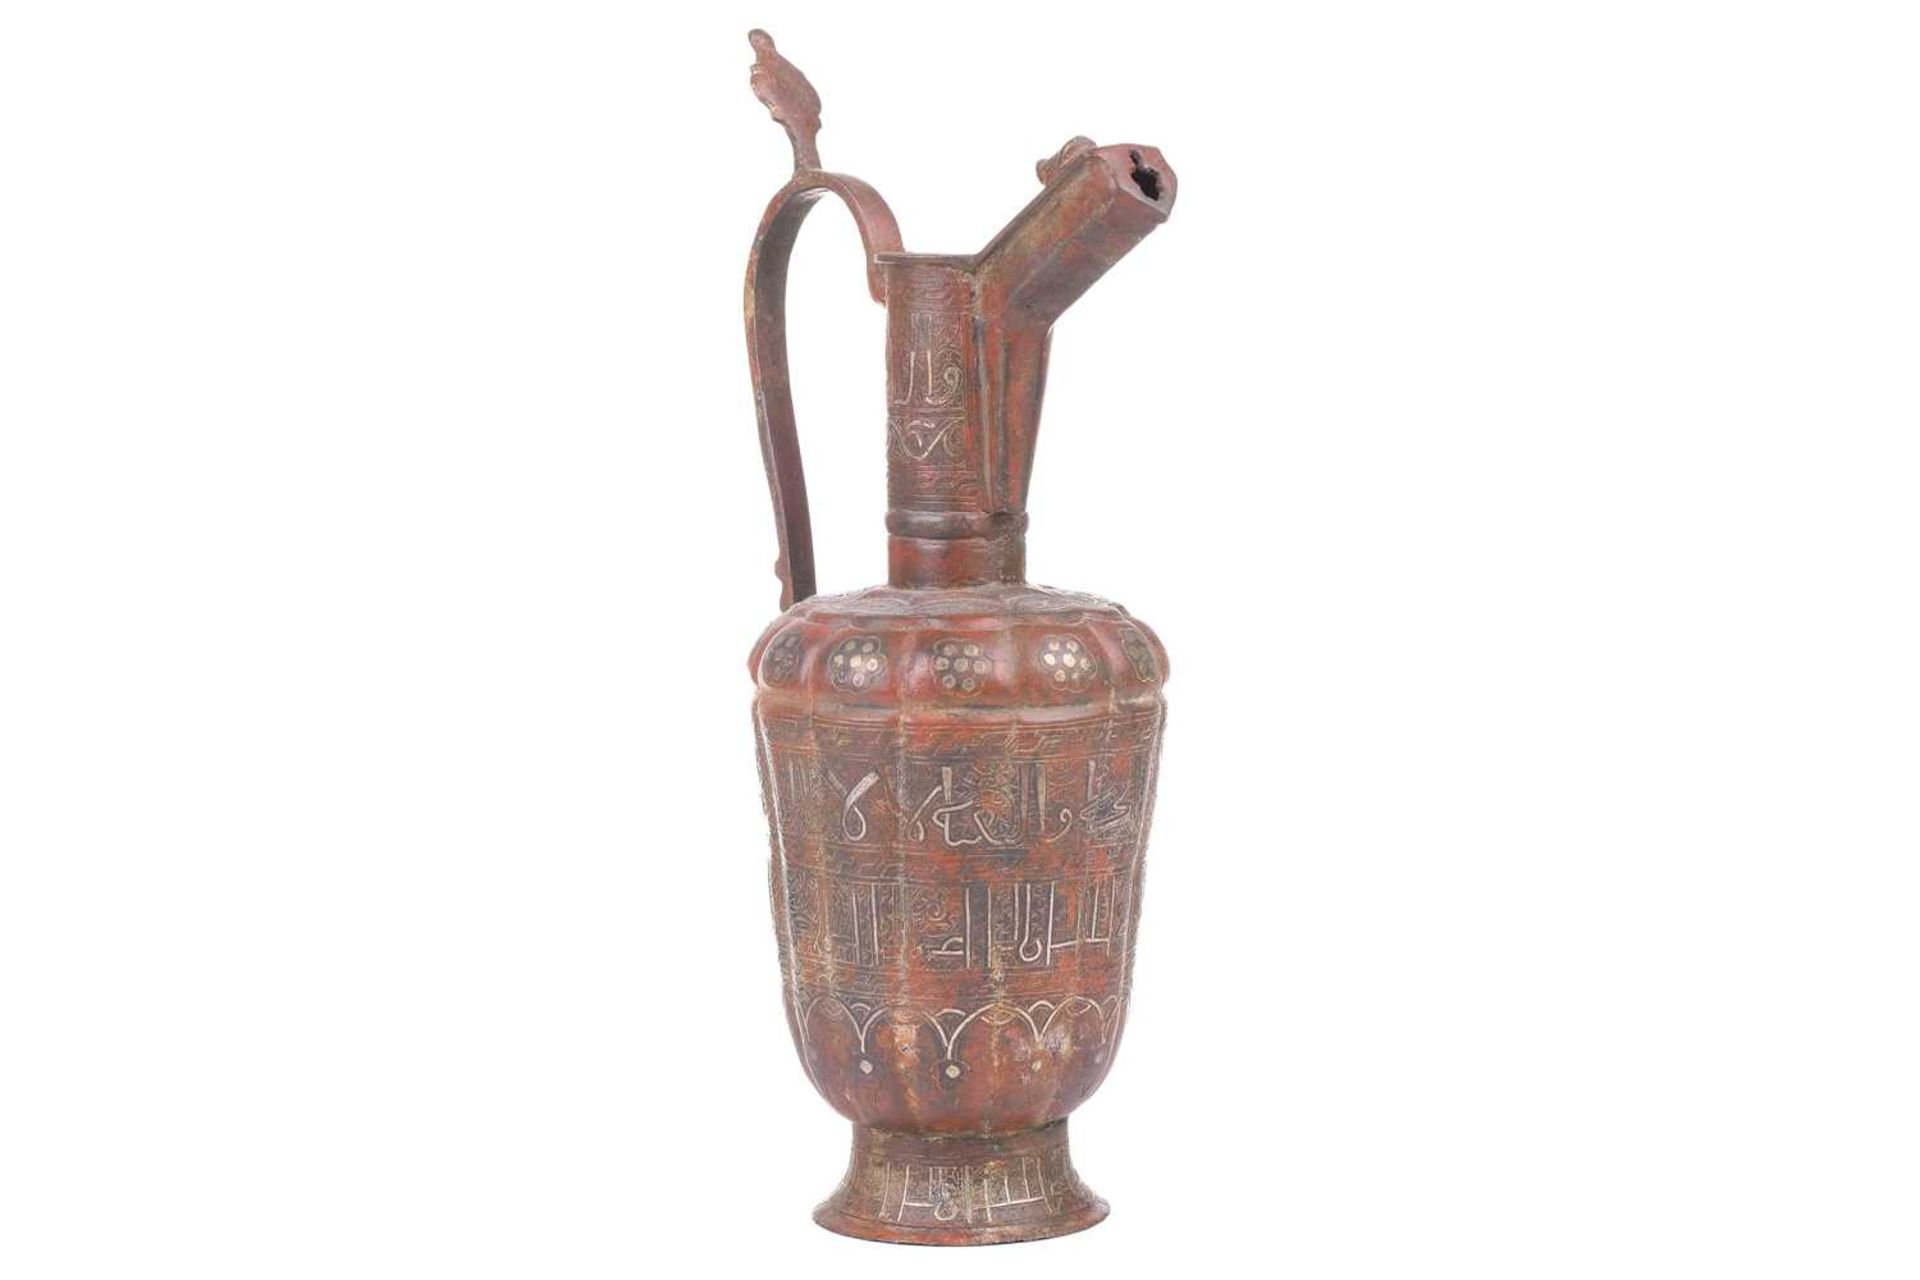 A 'Khorosan' style ewer, probaly North east Iran, of fluted lobed form, with stylised Islamic